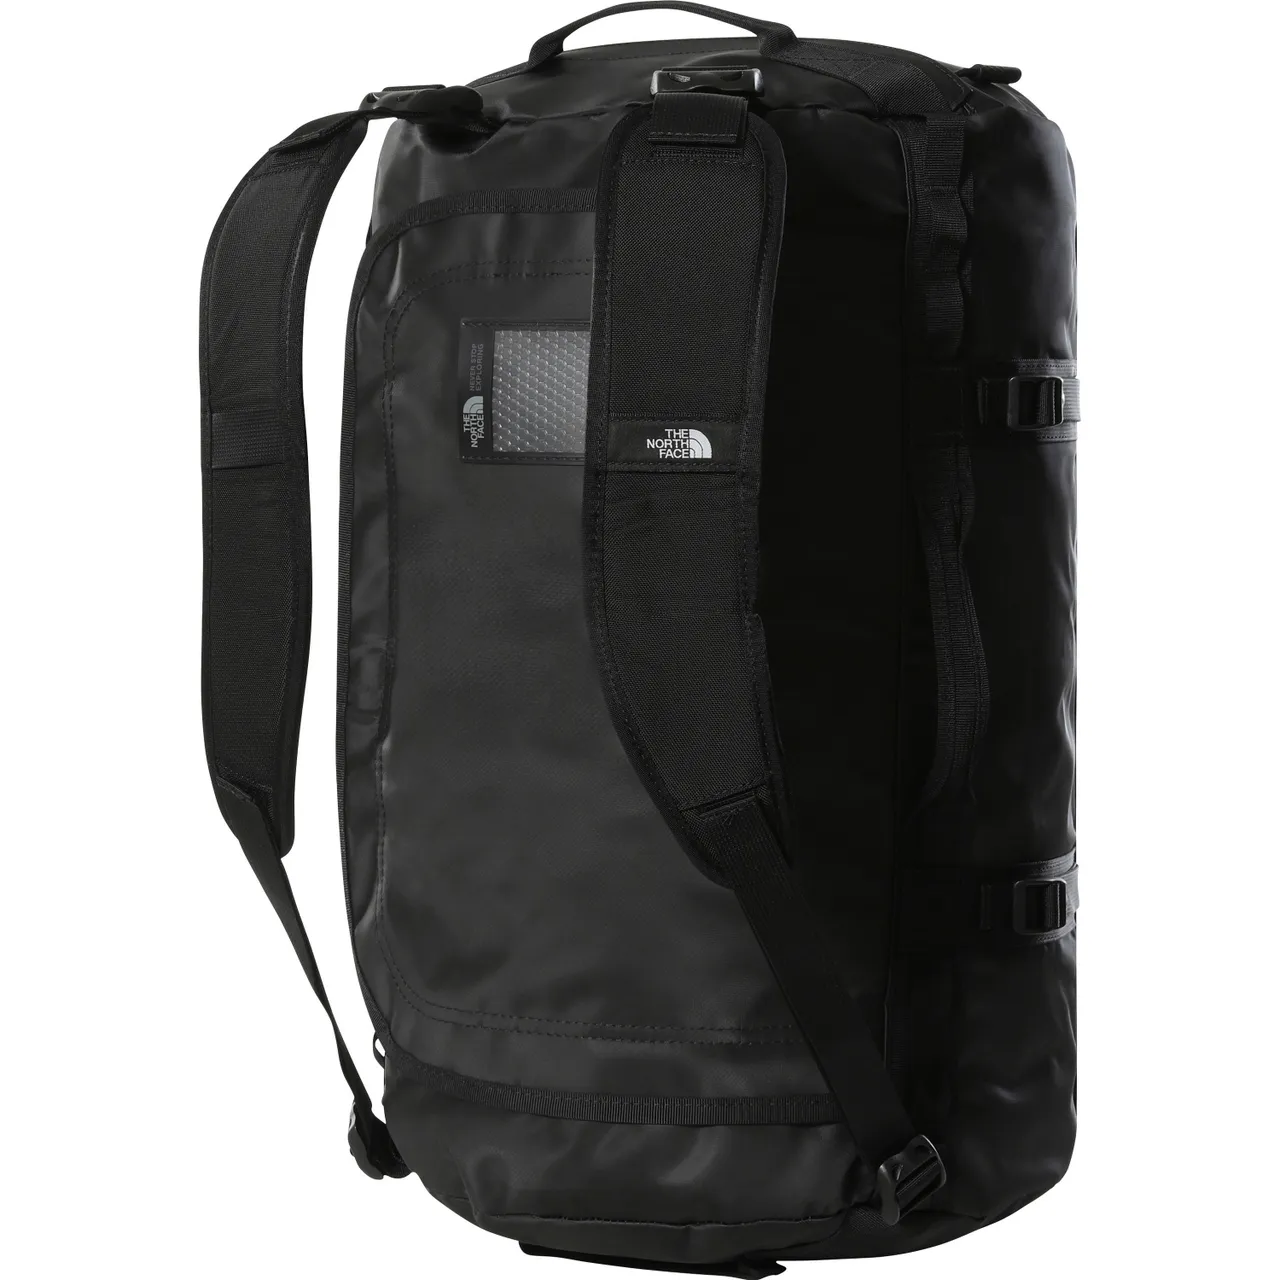 The North Face BASE CAMP DUFFEL - S Reisetasche